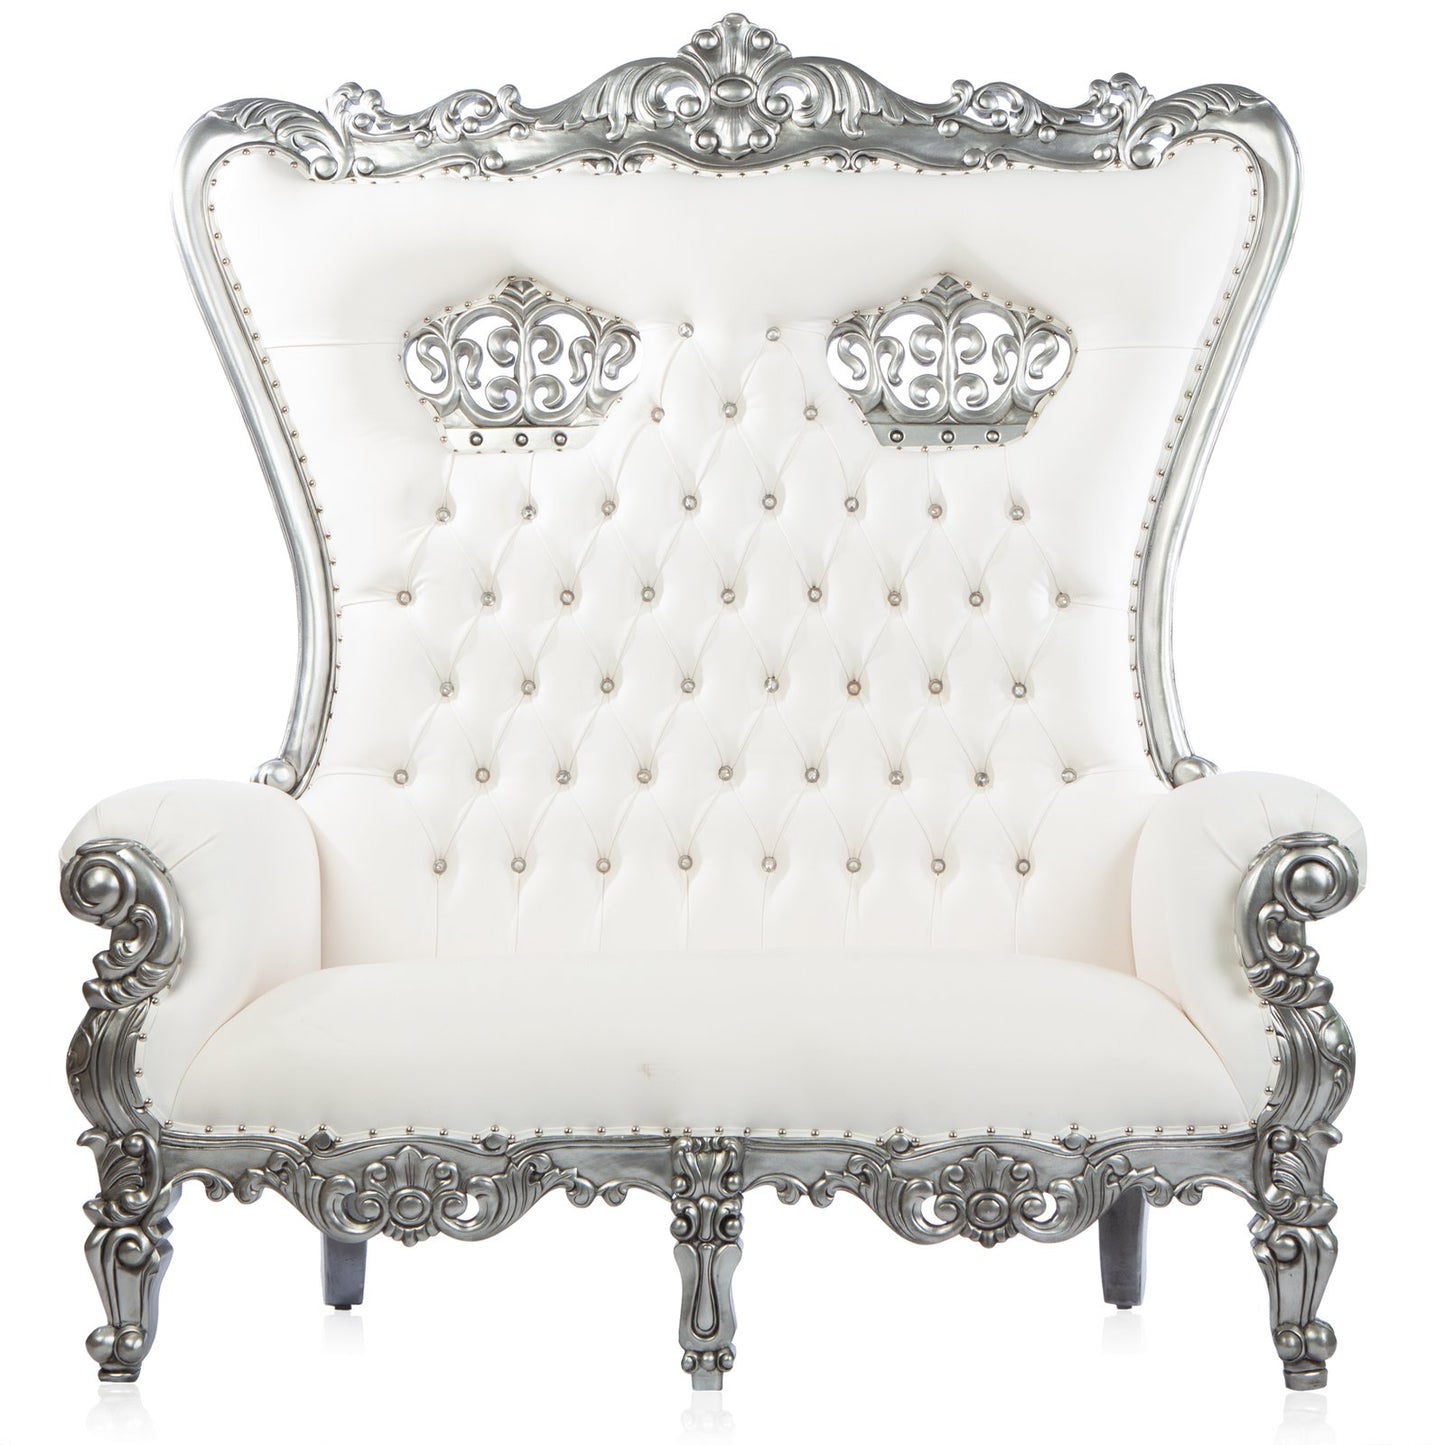 White and Silver Double Throne Chair Rental